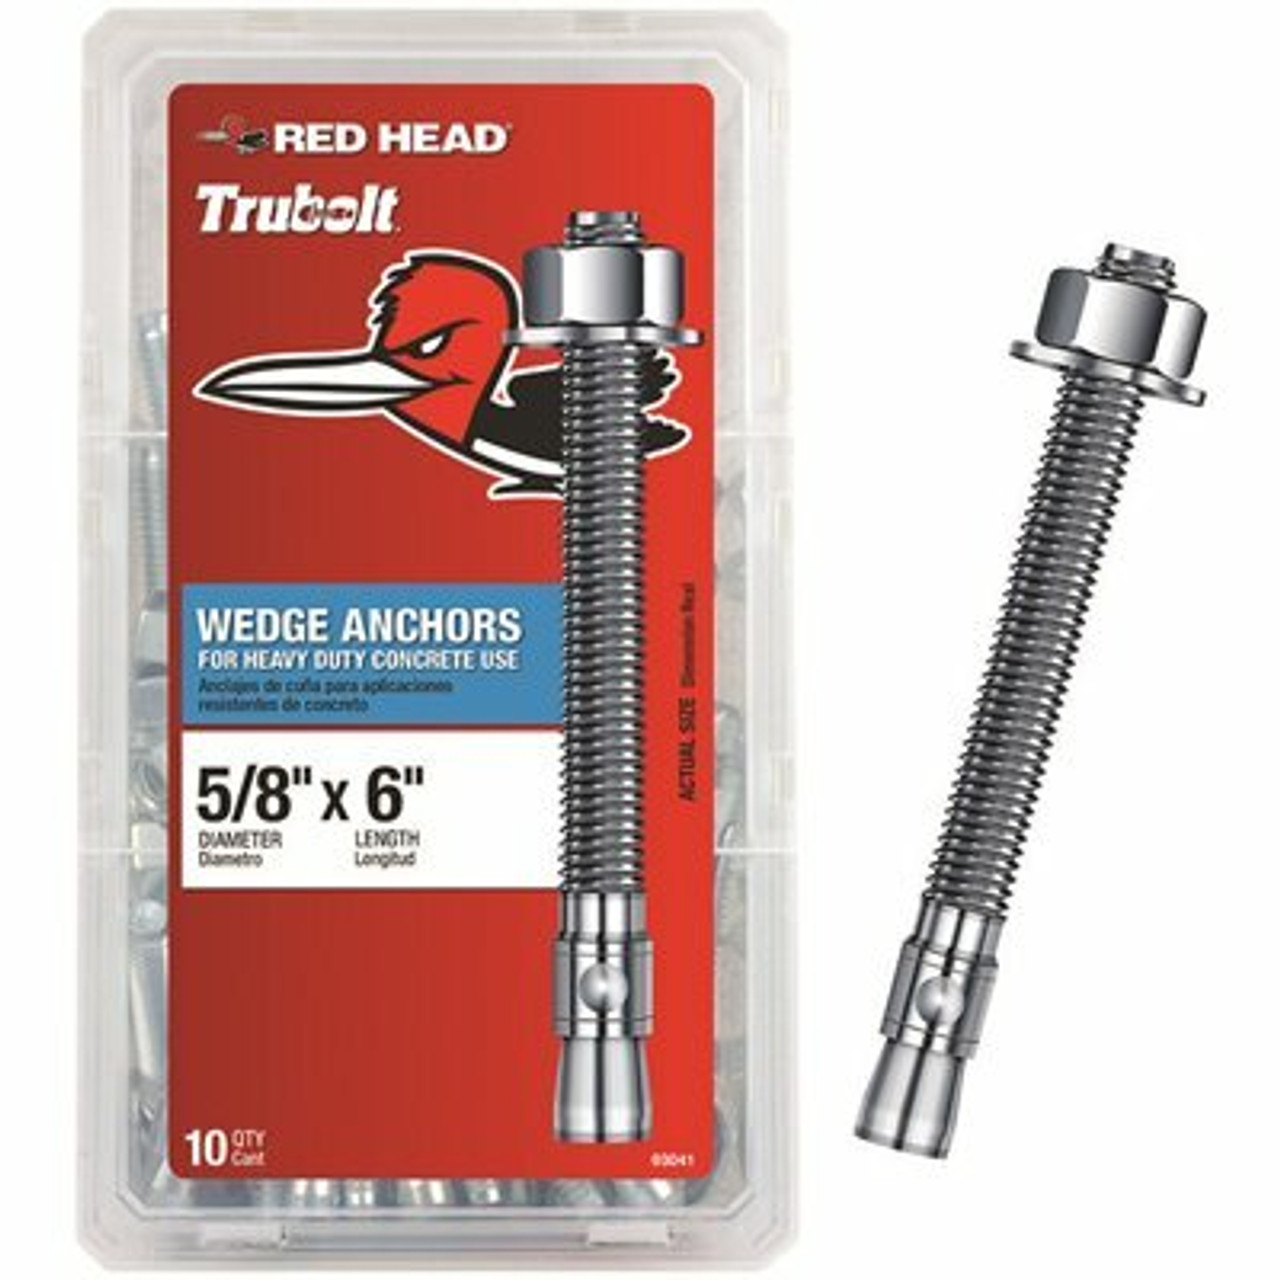 Red Head 5/8 In. X 6 In. Zinc Plated Steel Hex Nut Head Solid Concrete Wedge Anchors (10-Pack)